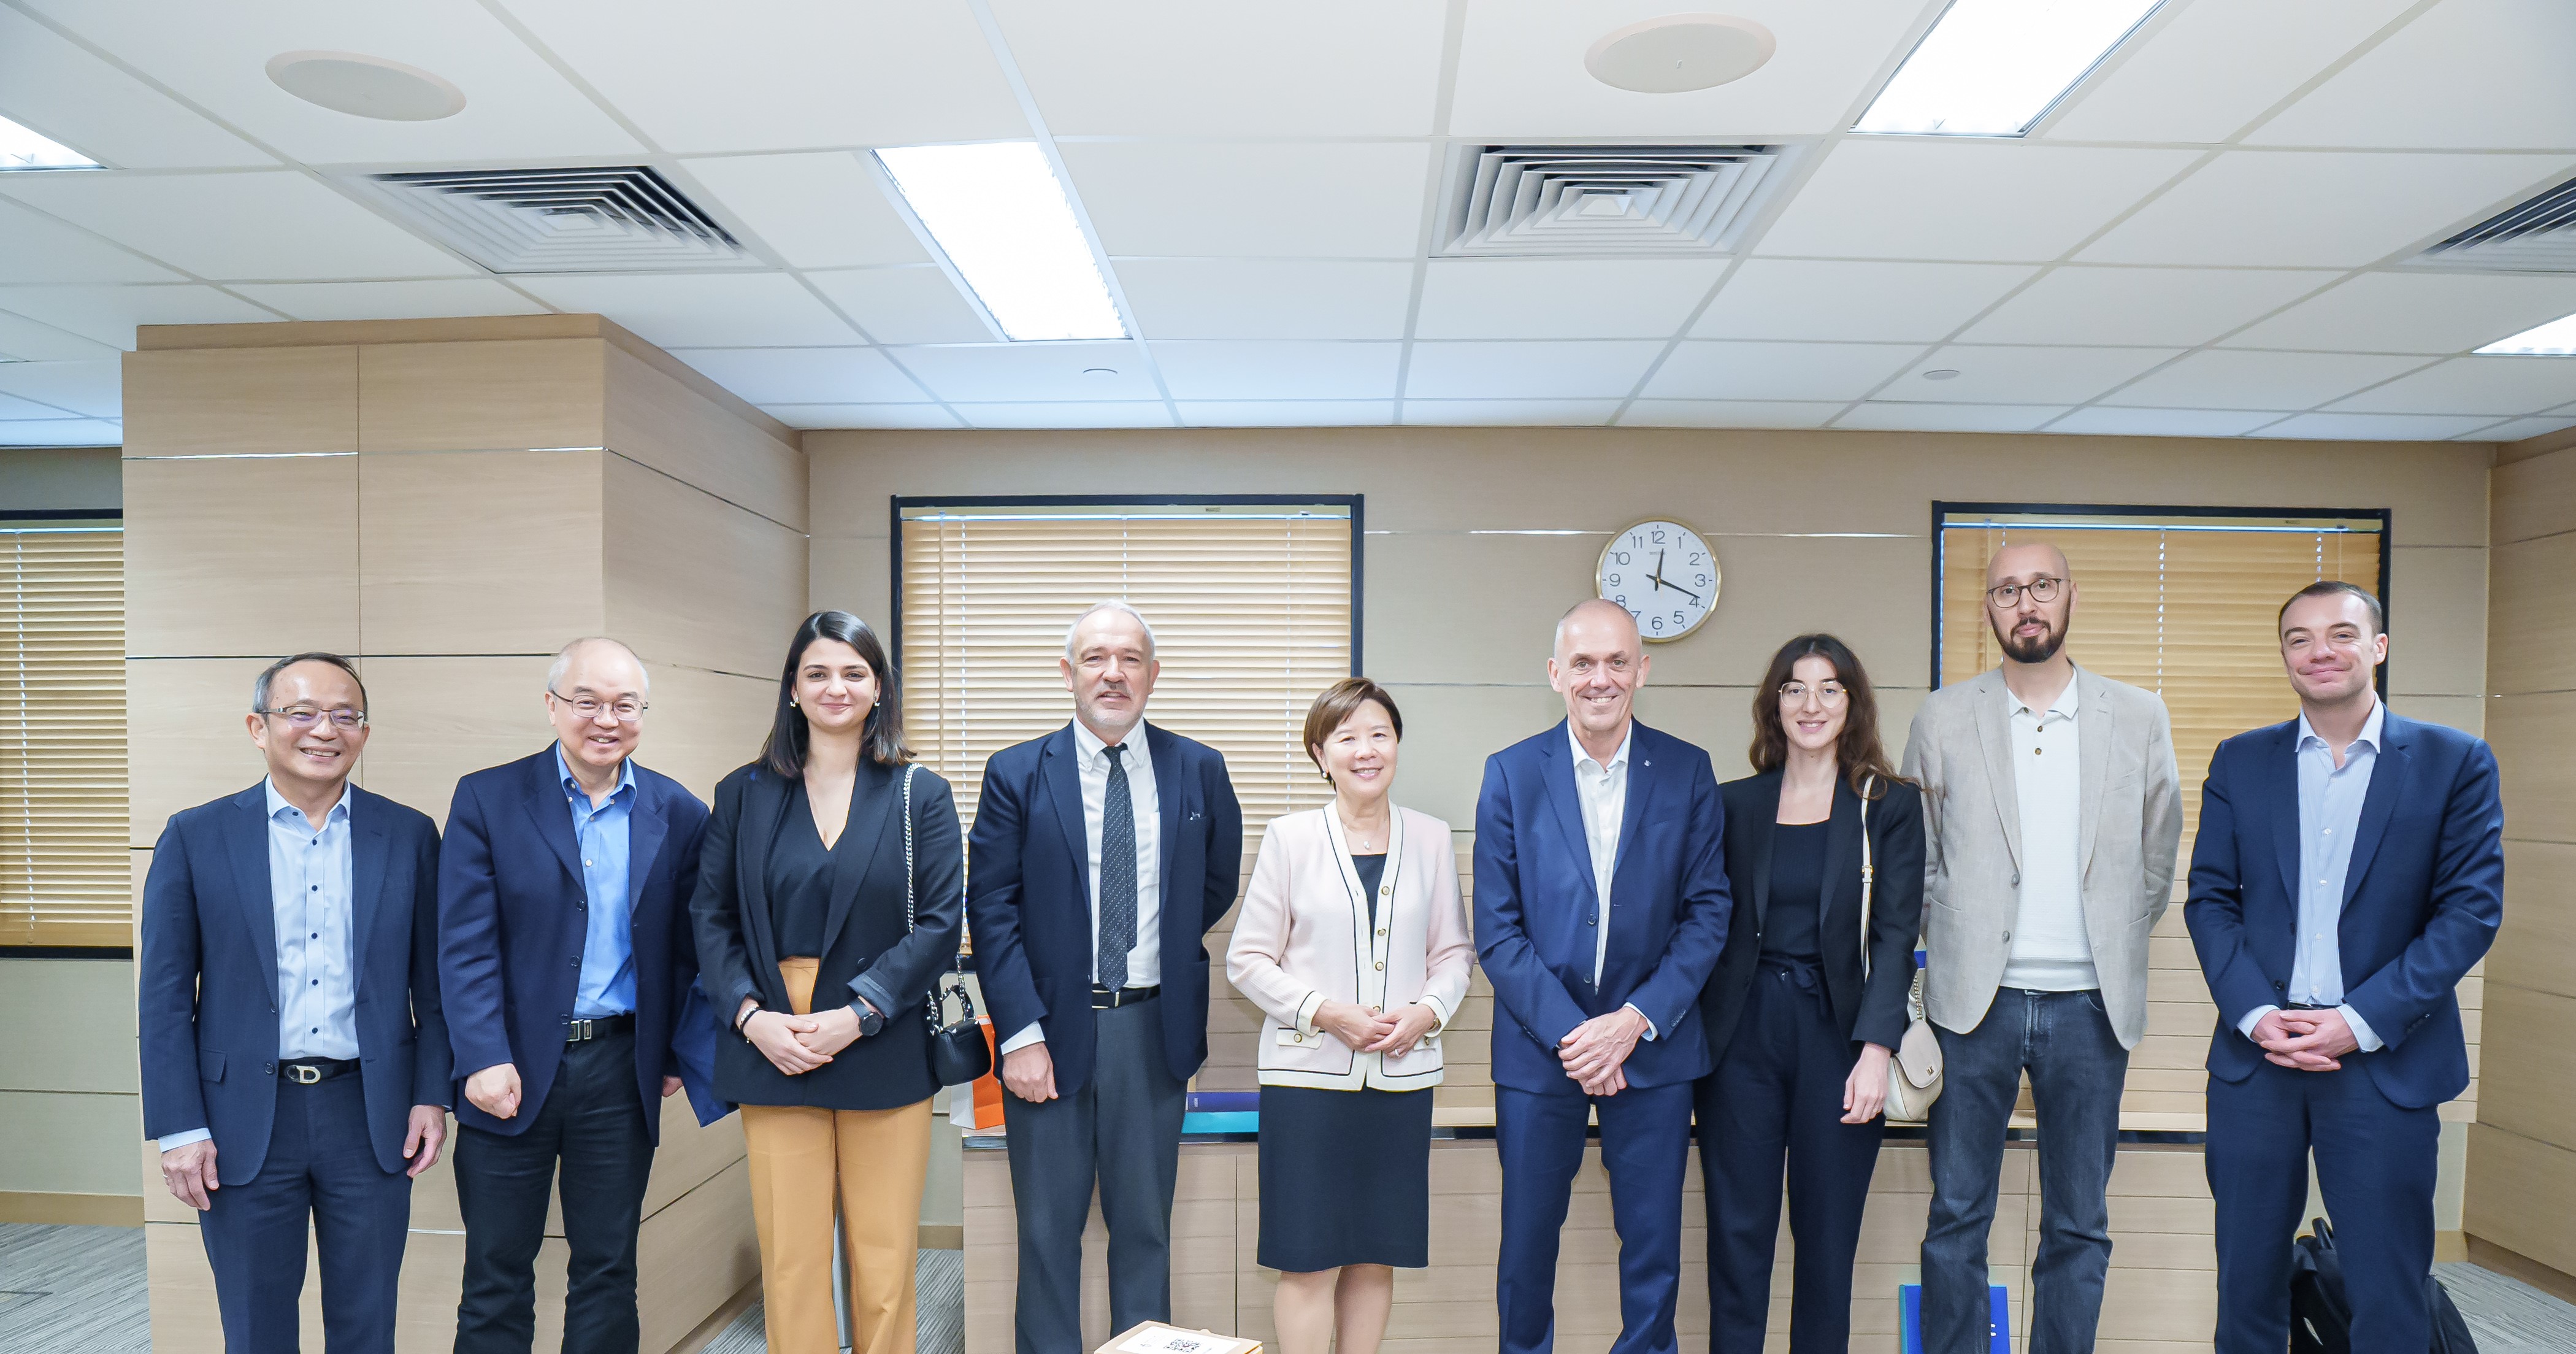 Delegation from the CNRS met with HKUST leadership team to understand HKUST’s strategic research focus and highlighted research endeavors.